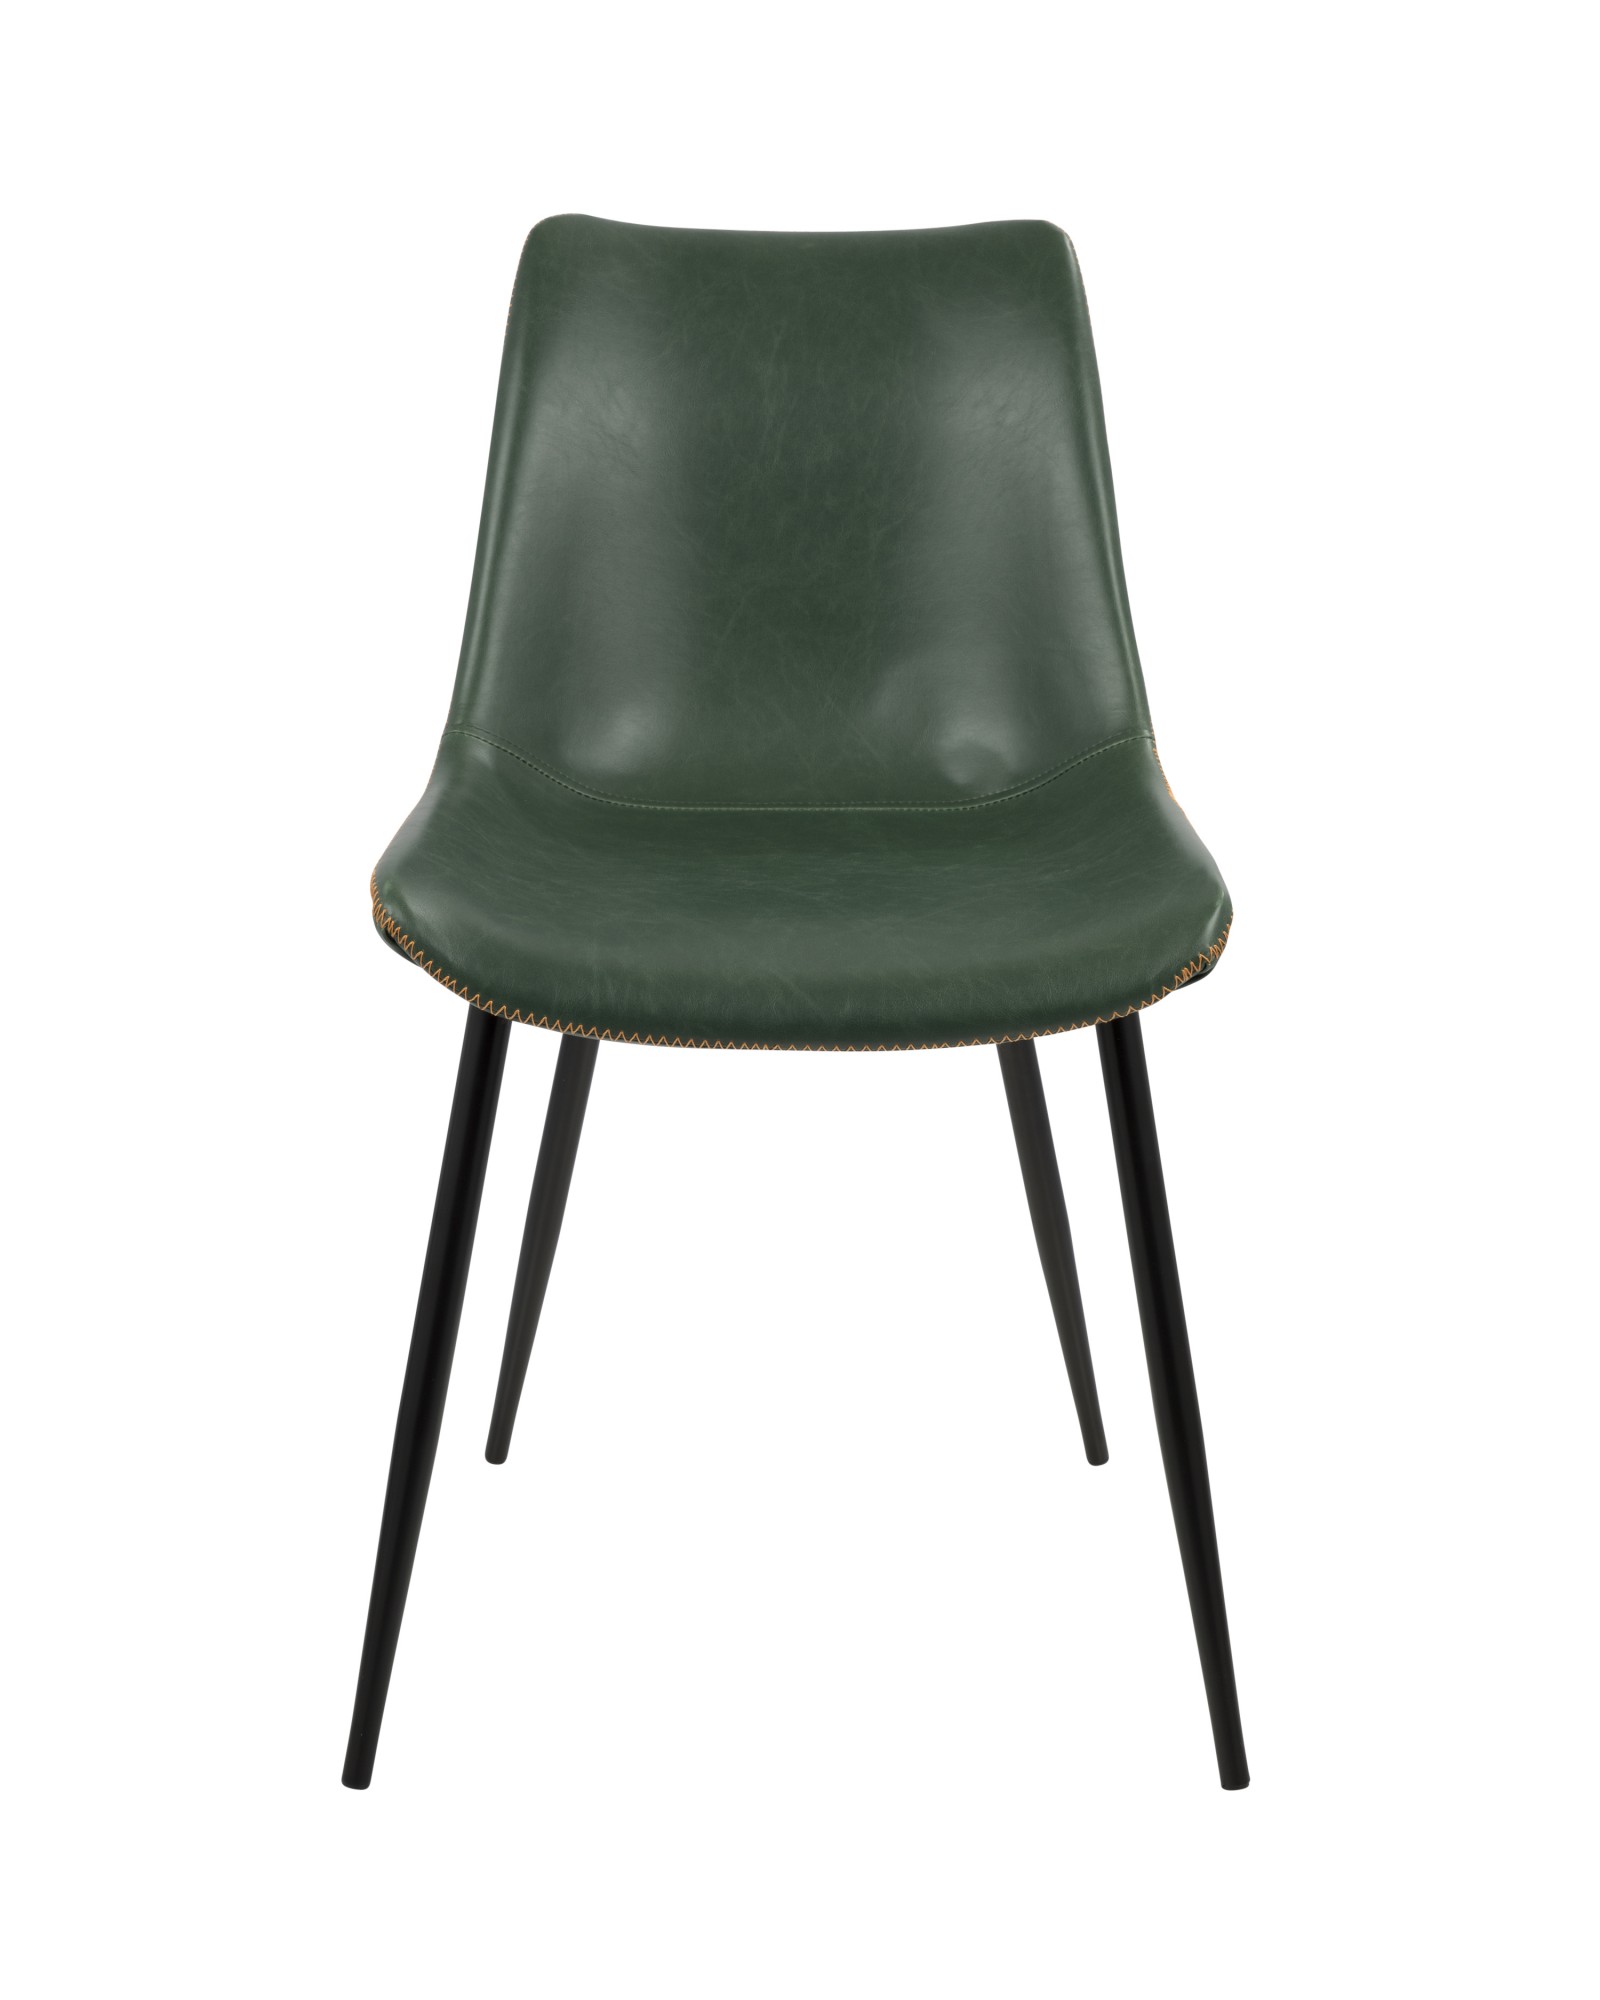 Durango Contemporary Dining Chair in Black with Green Vintage Faux Leather - Set of 2